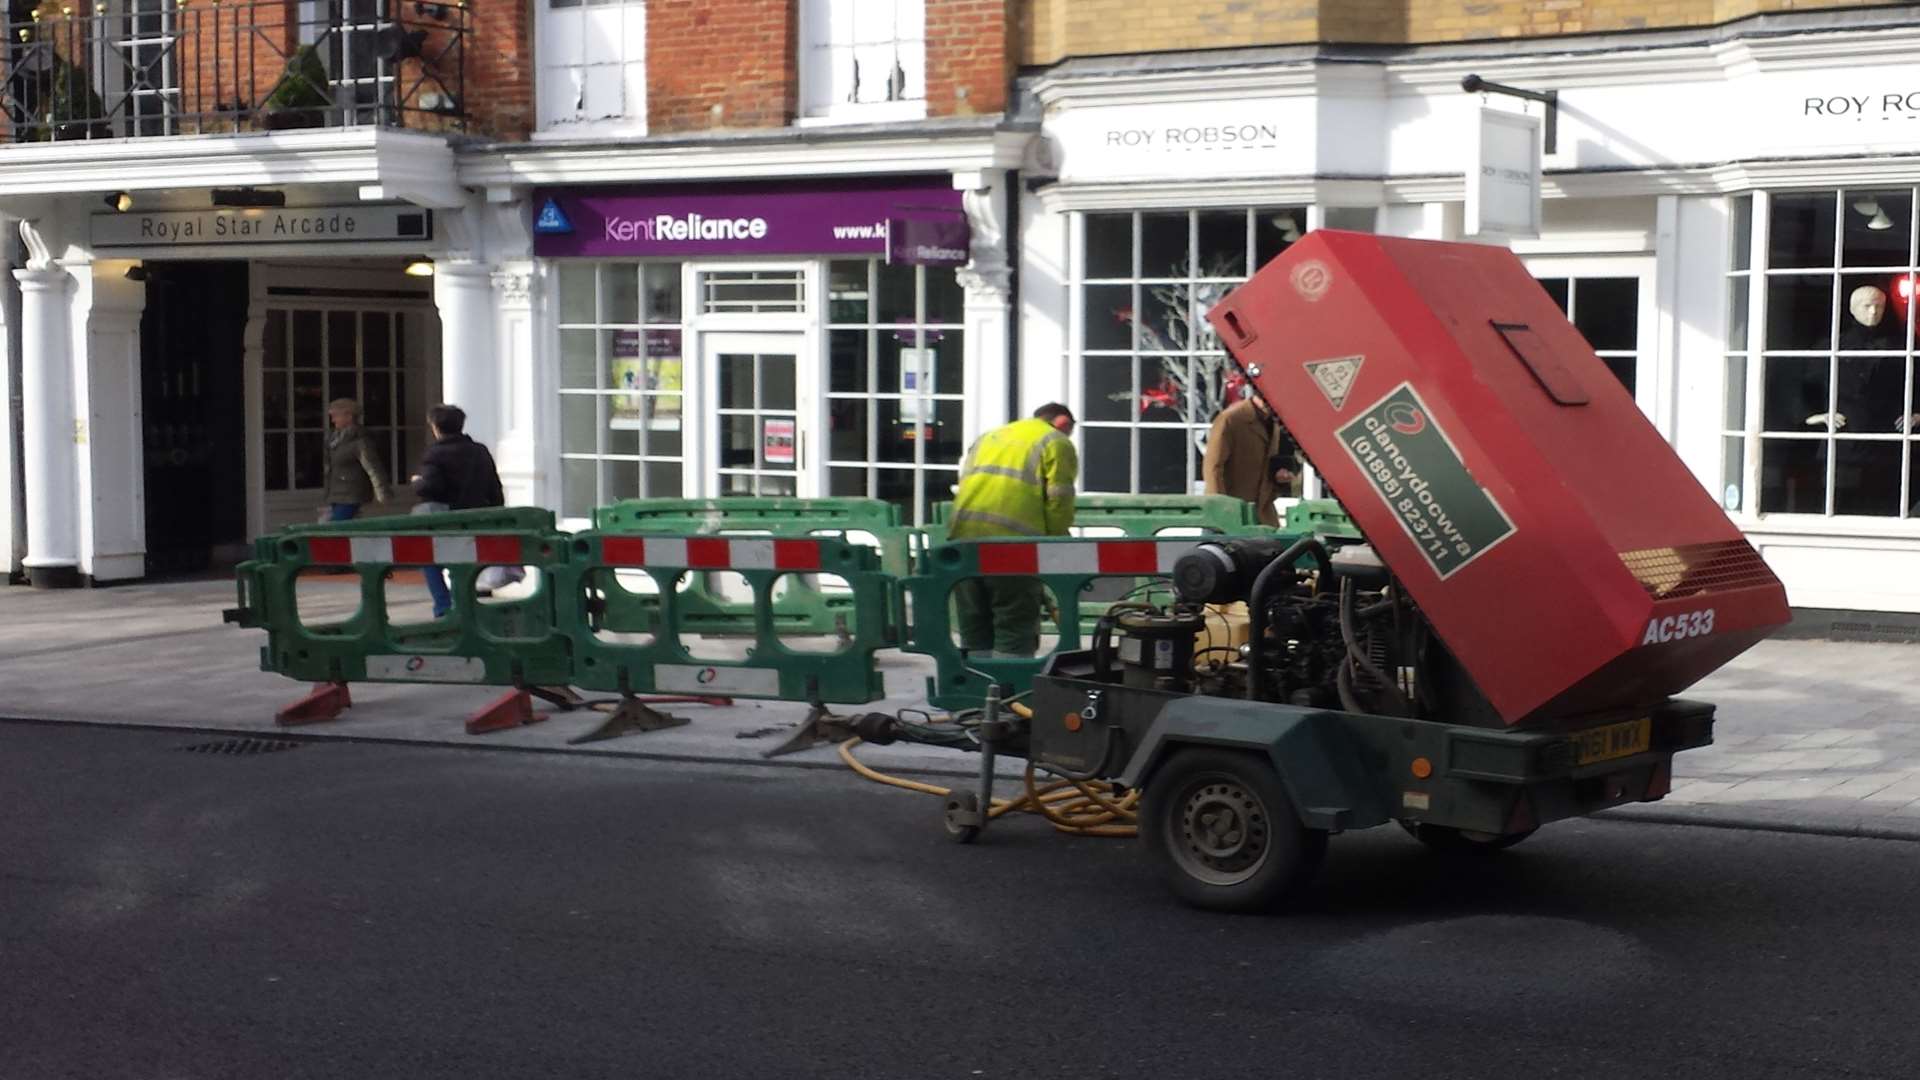 Workmen began digging up the pavement this afternoon